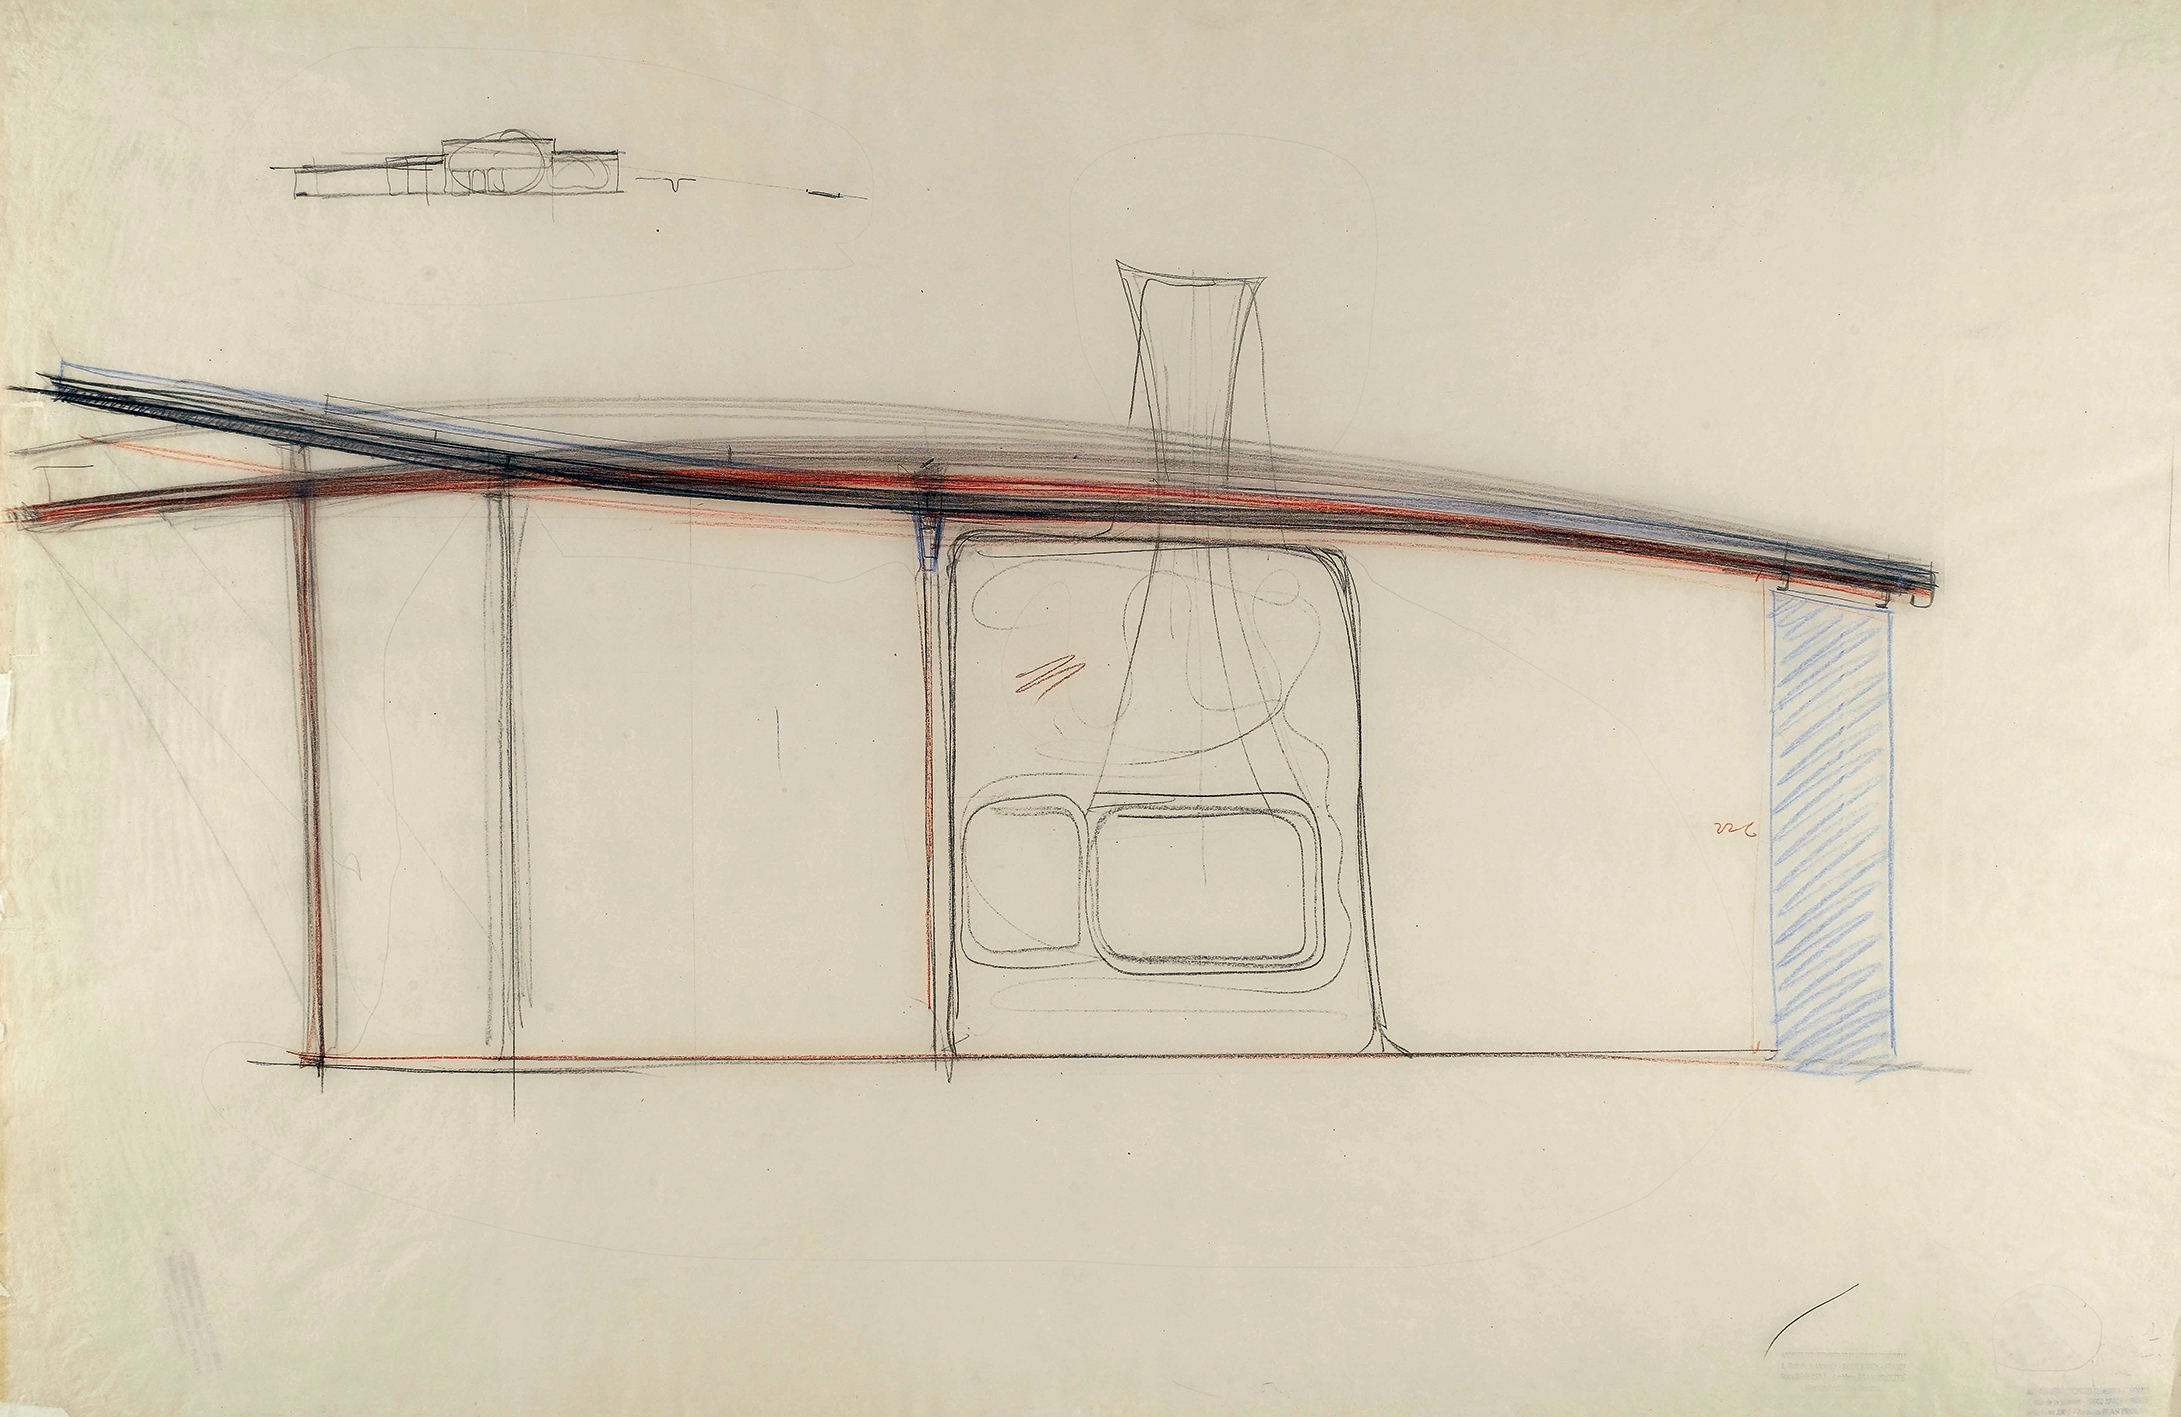 Jean Prouvé. Section drawing of the main room showing flexible roof, ca. 1954.